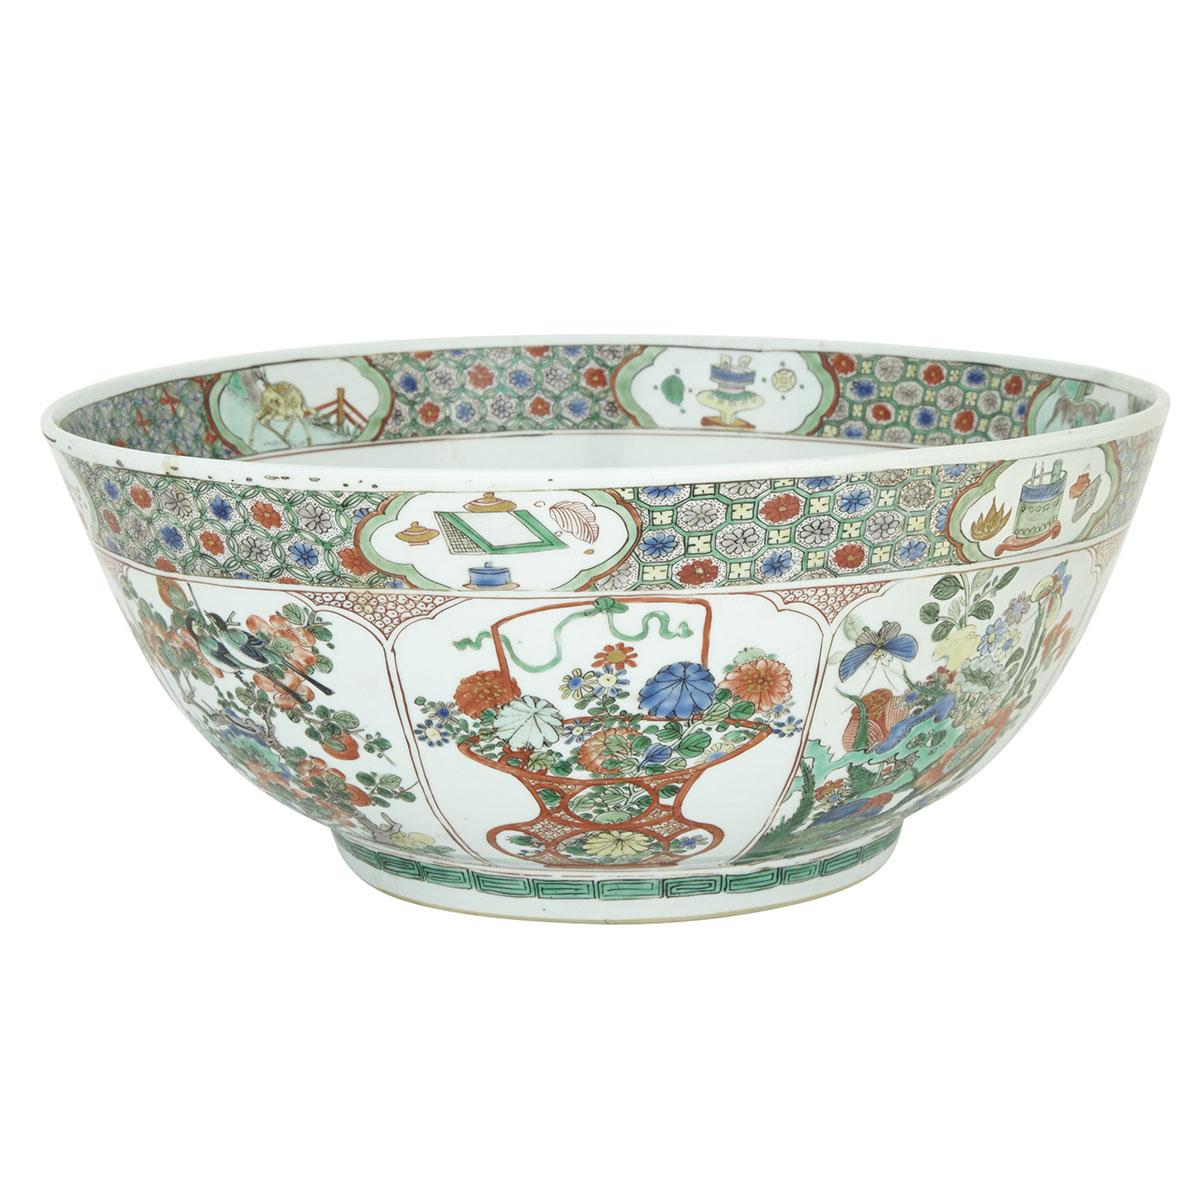 A MASSIVE FAMILLE-VERTE WUCAI PUNCH BOWL, MARK AND PERIOD OF KANGXI (1662-1772) 清康熙 五彩牡丹瑞果紋大碗 Finely - Image 7 of 10